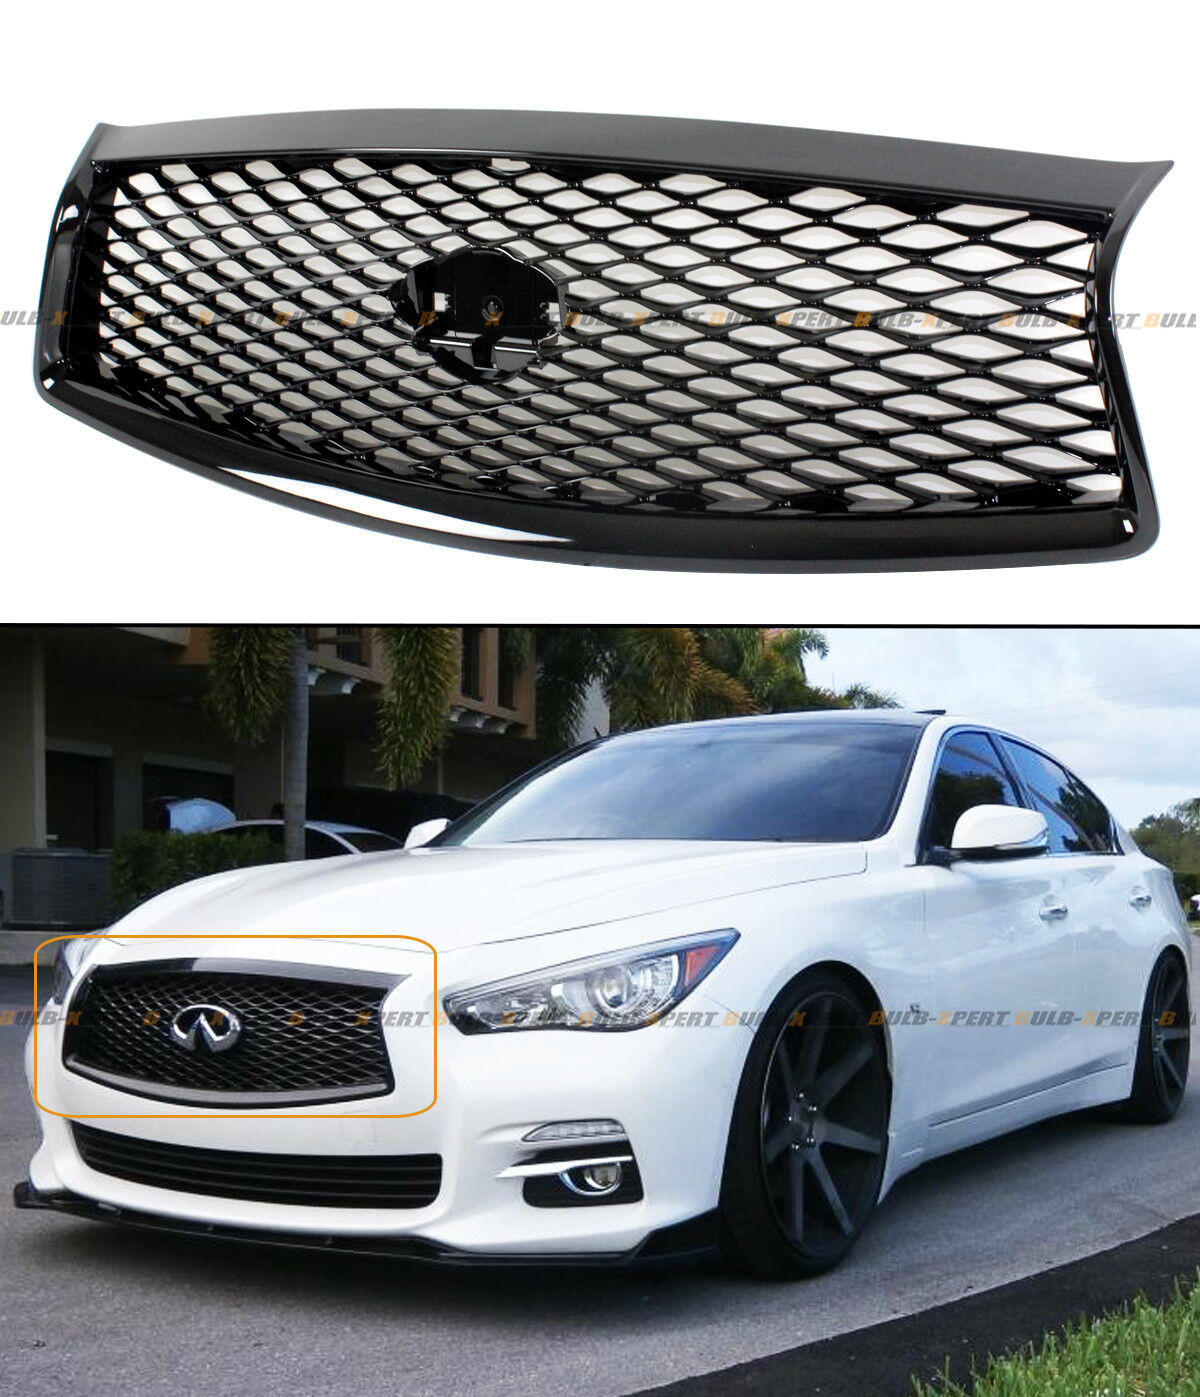 FOR 2014-17 INFINITI Q50 HIGH GLOSS BLACK OUT FRONT HOOD UPPER GRILL REPLACEMENT